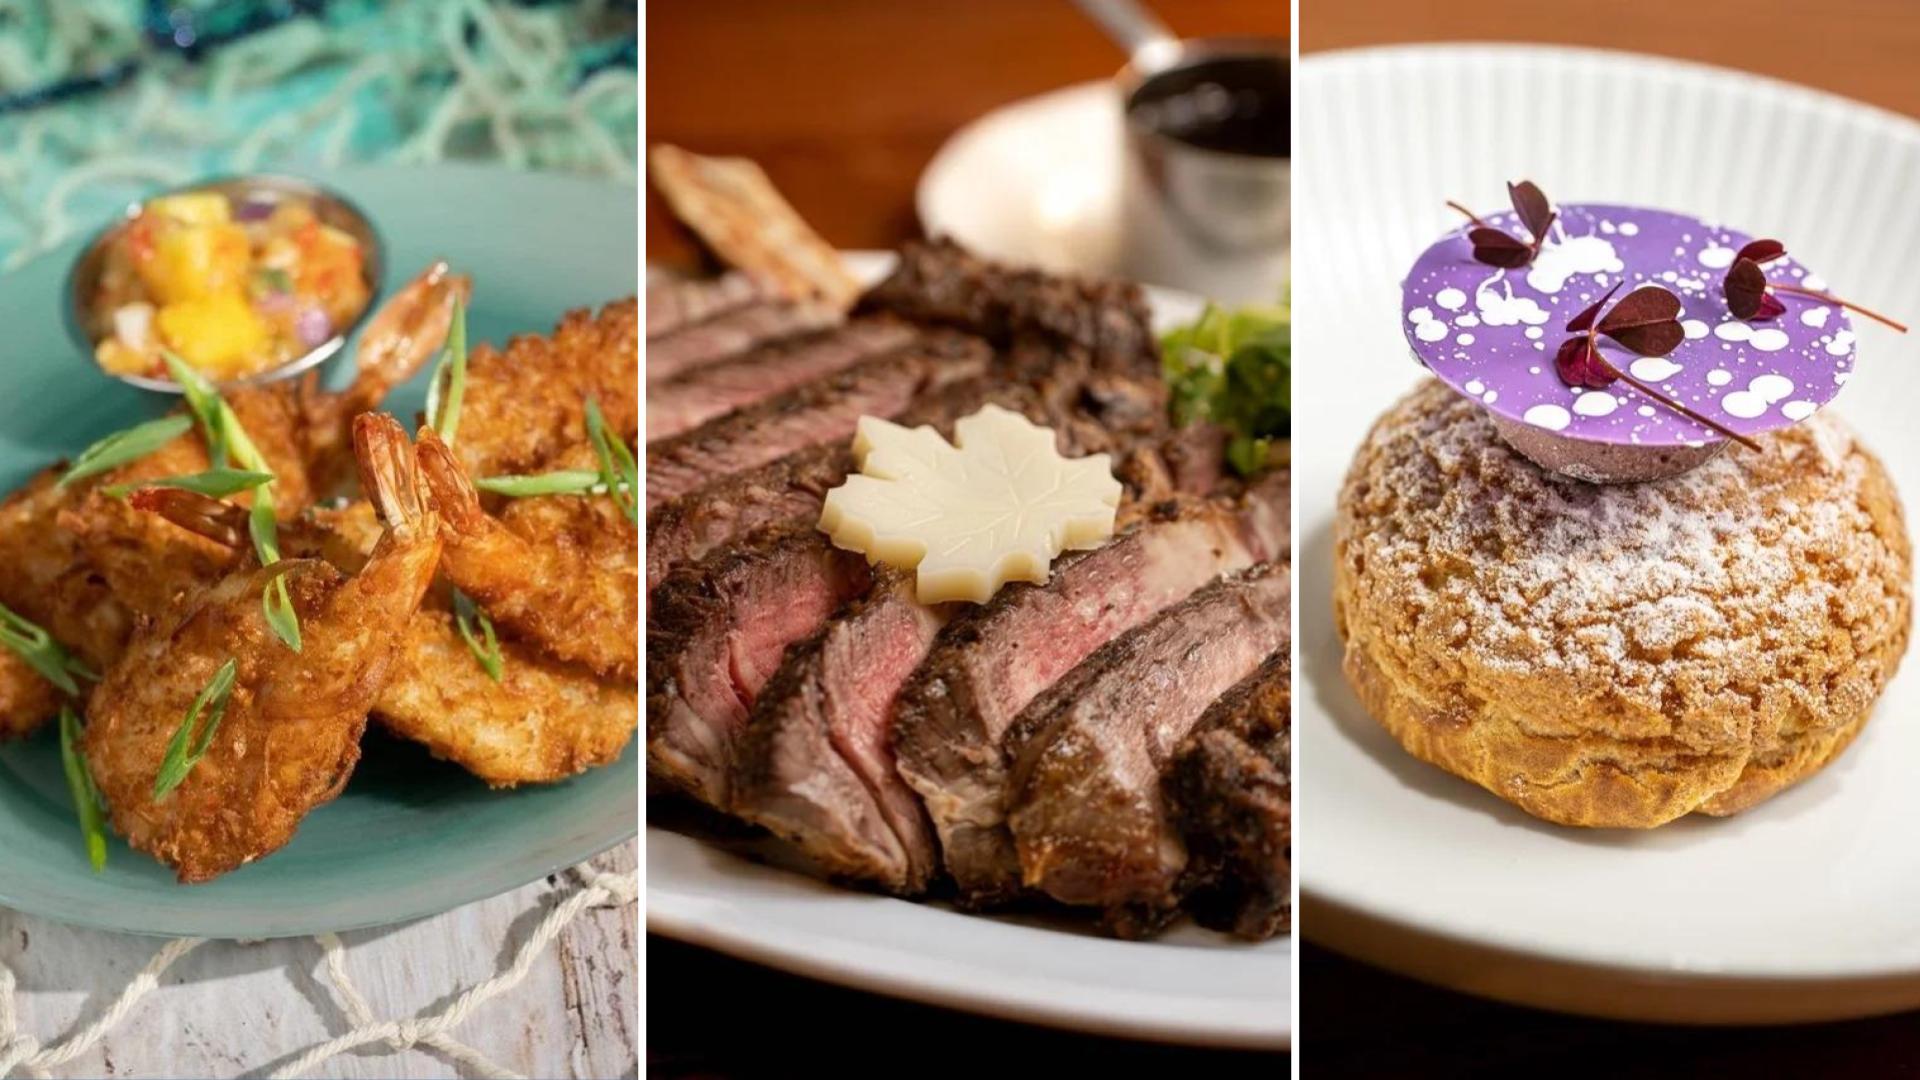 New Offerings at Coral Reef and Le Cellier